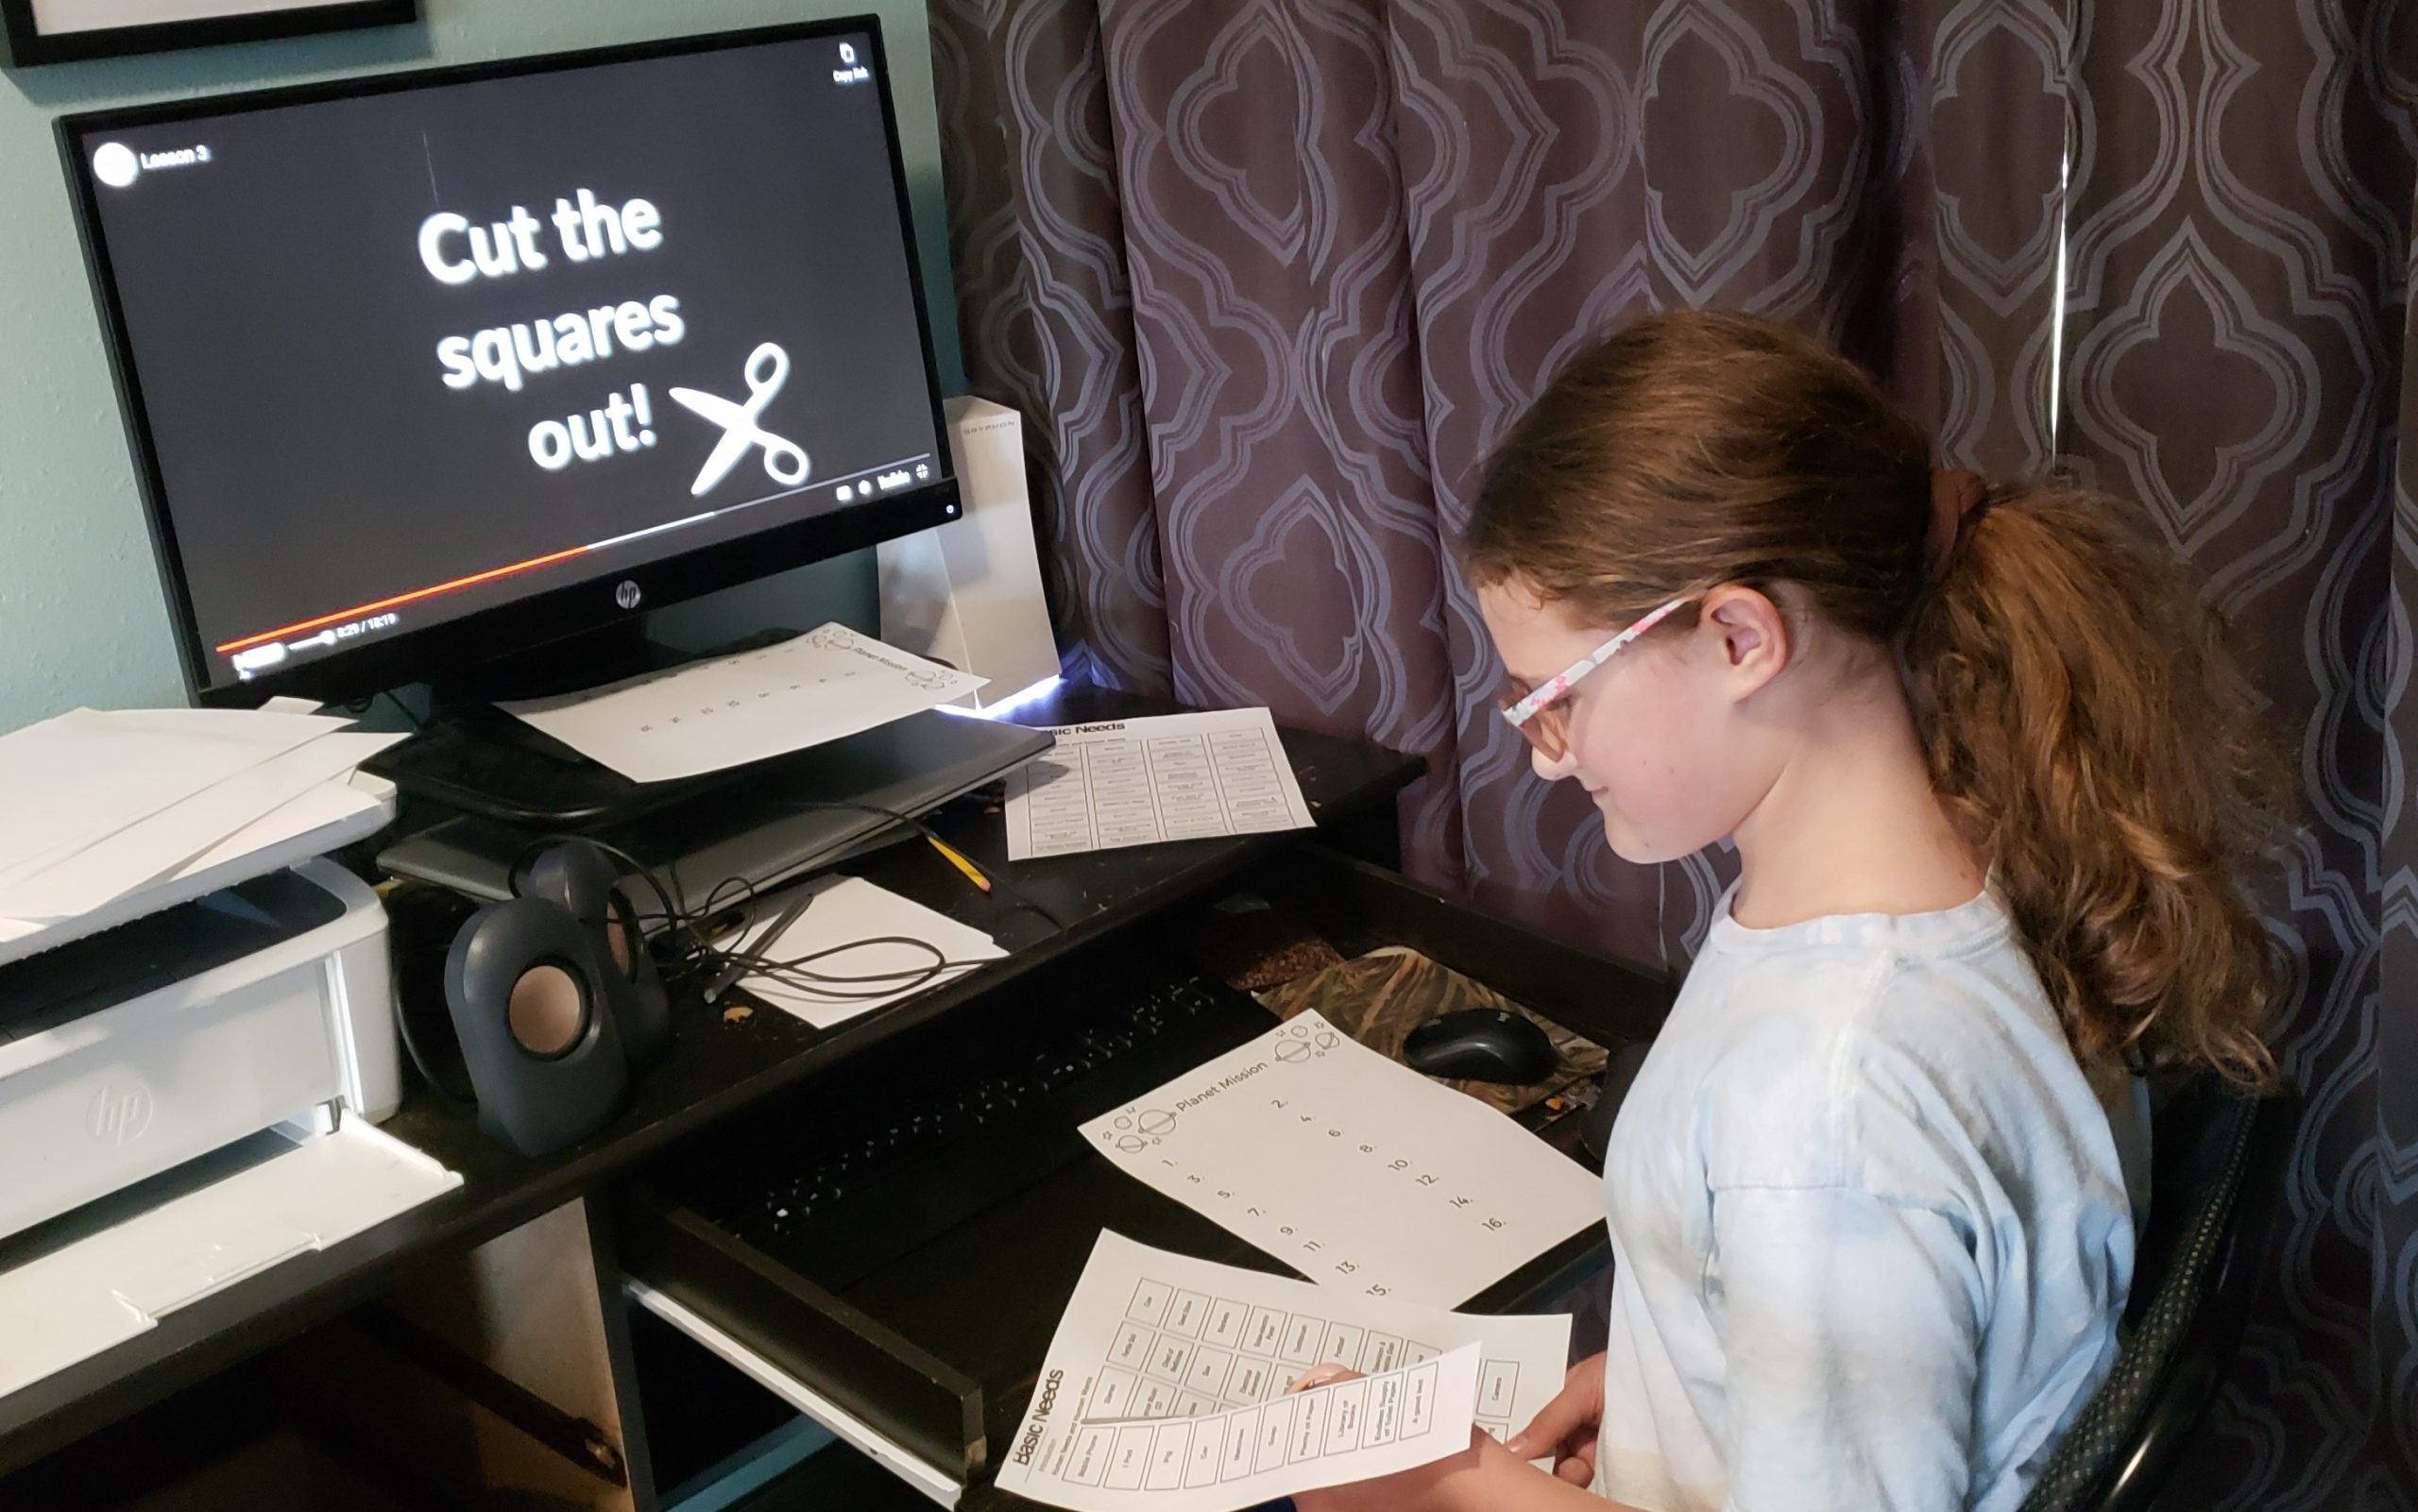 girl sitting at desk cutting word squares out of paper for an activity computer monitor says cut the squares out